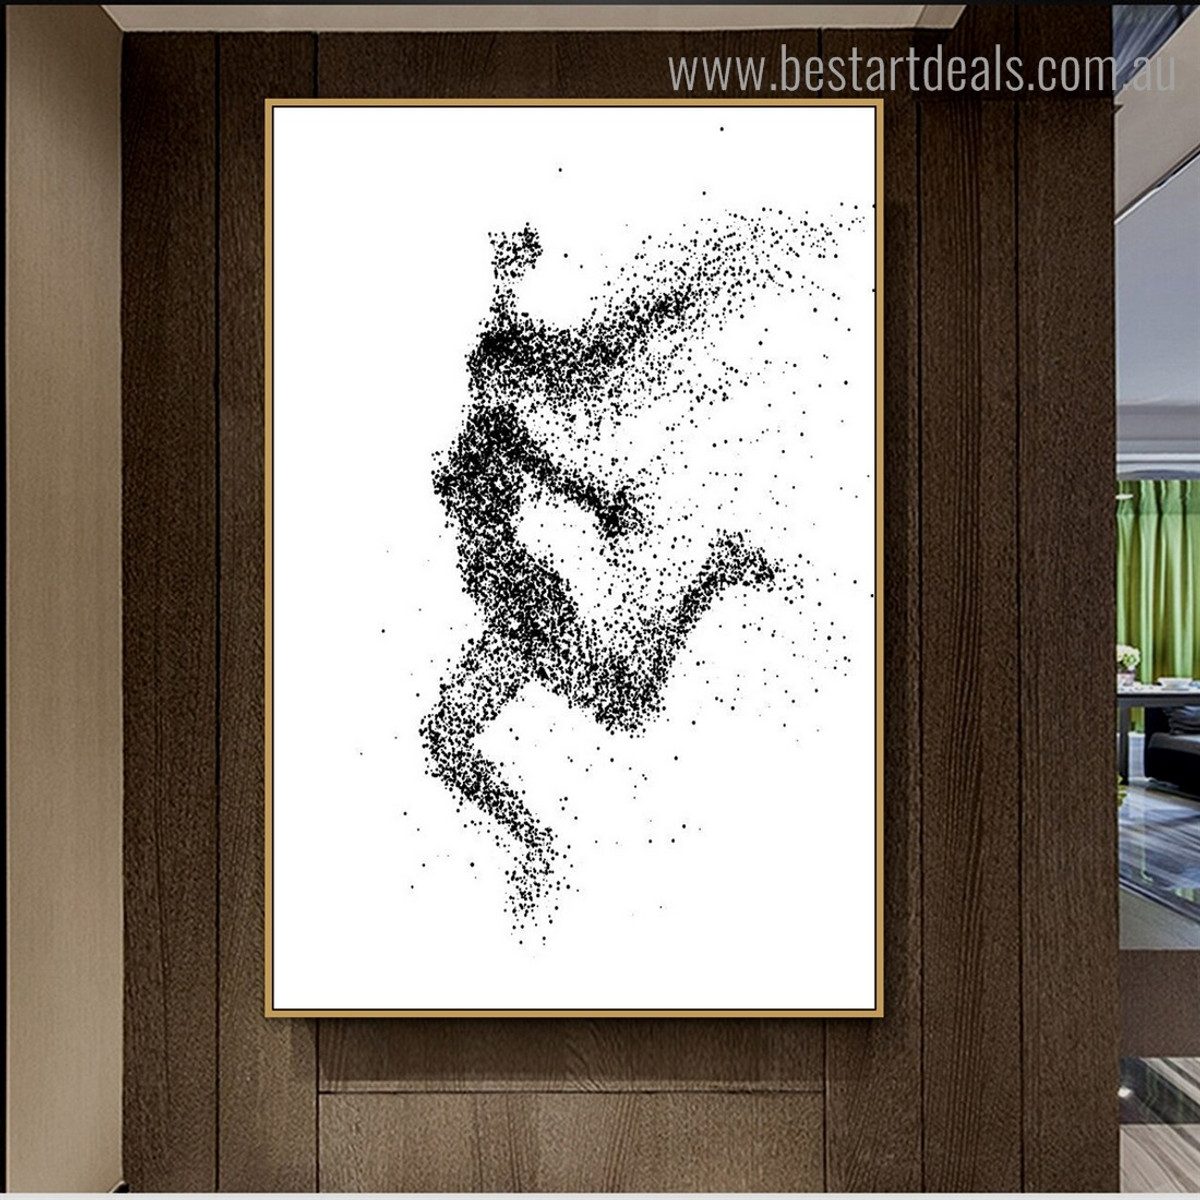 Jump Woman Abstract Illustration Modern Framed Artwork Image Canvas Print for Room Wall Adornment